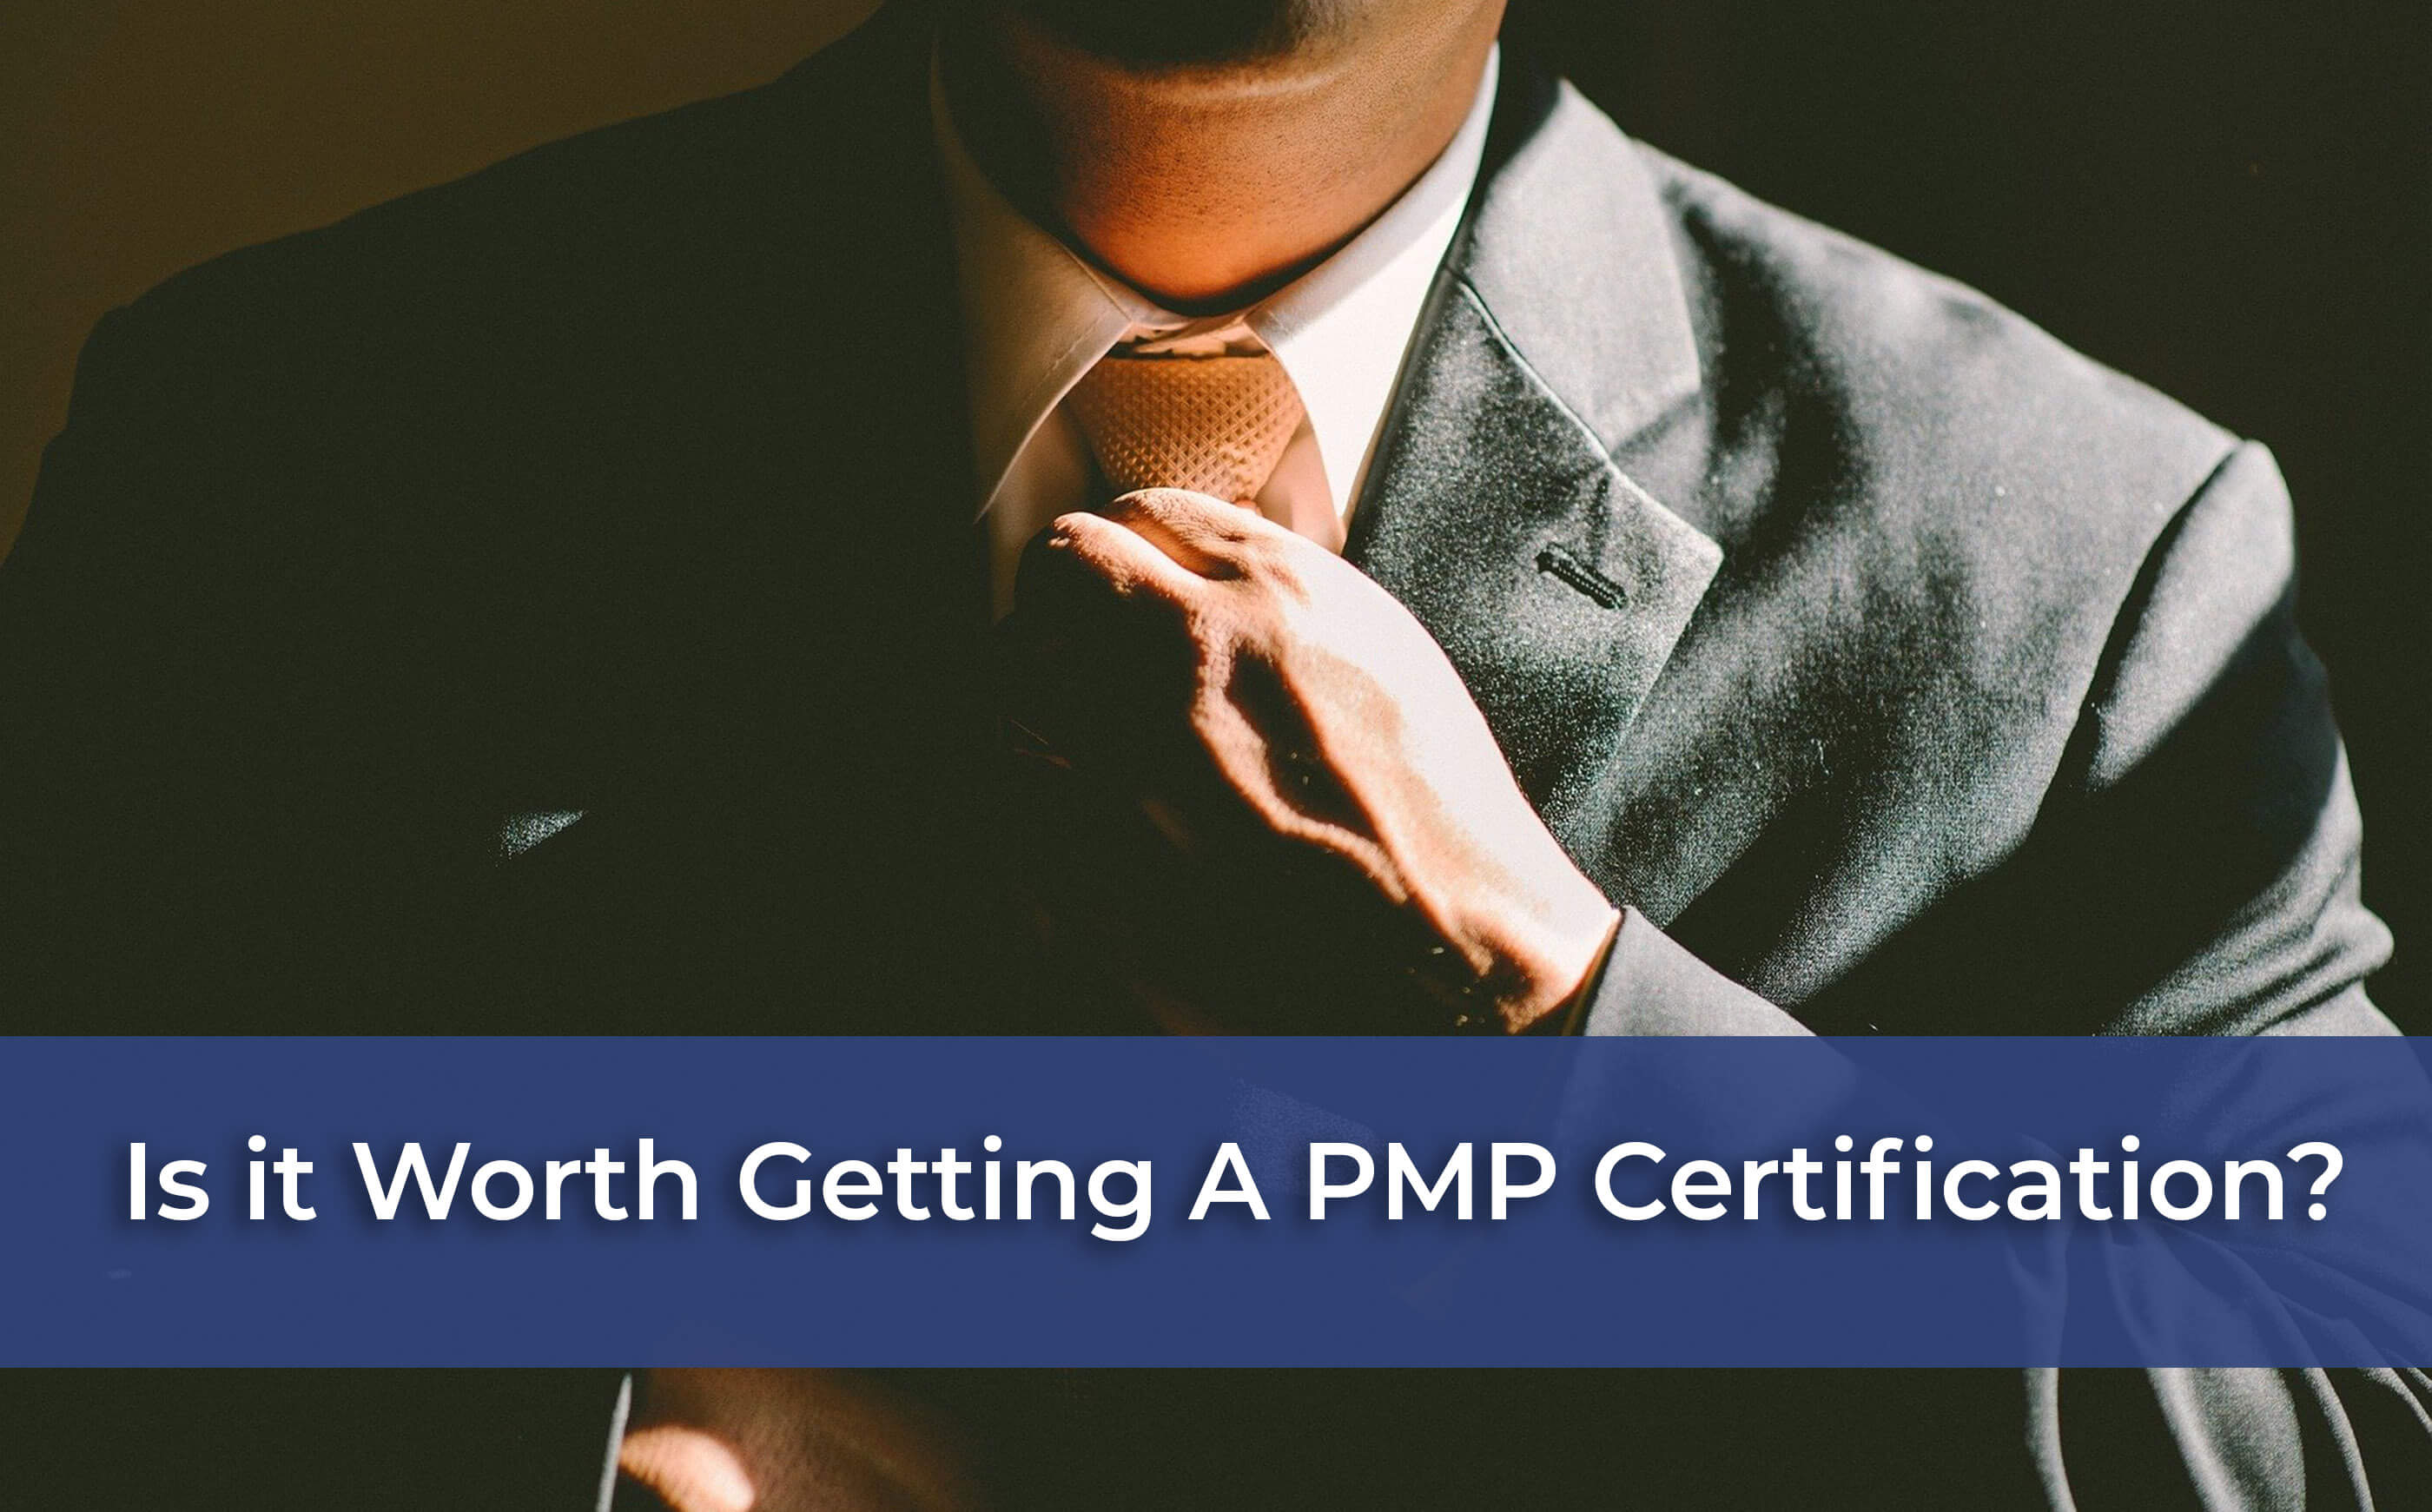 pmp course in toronto